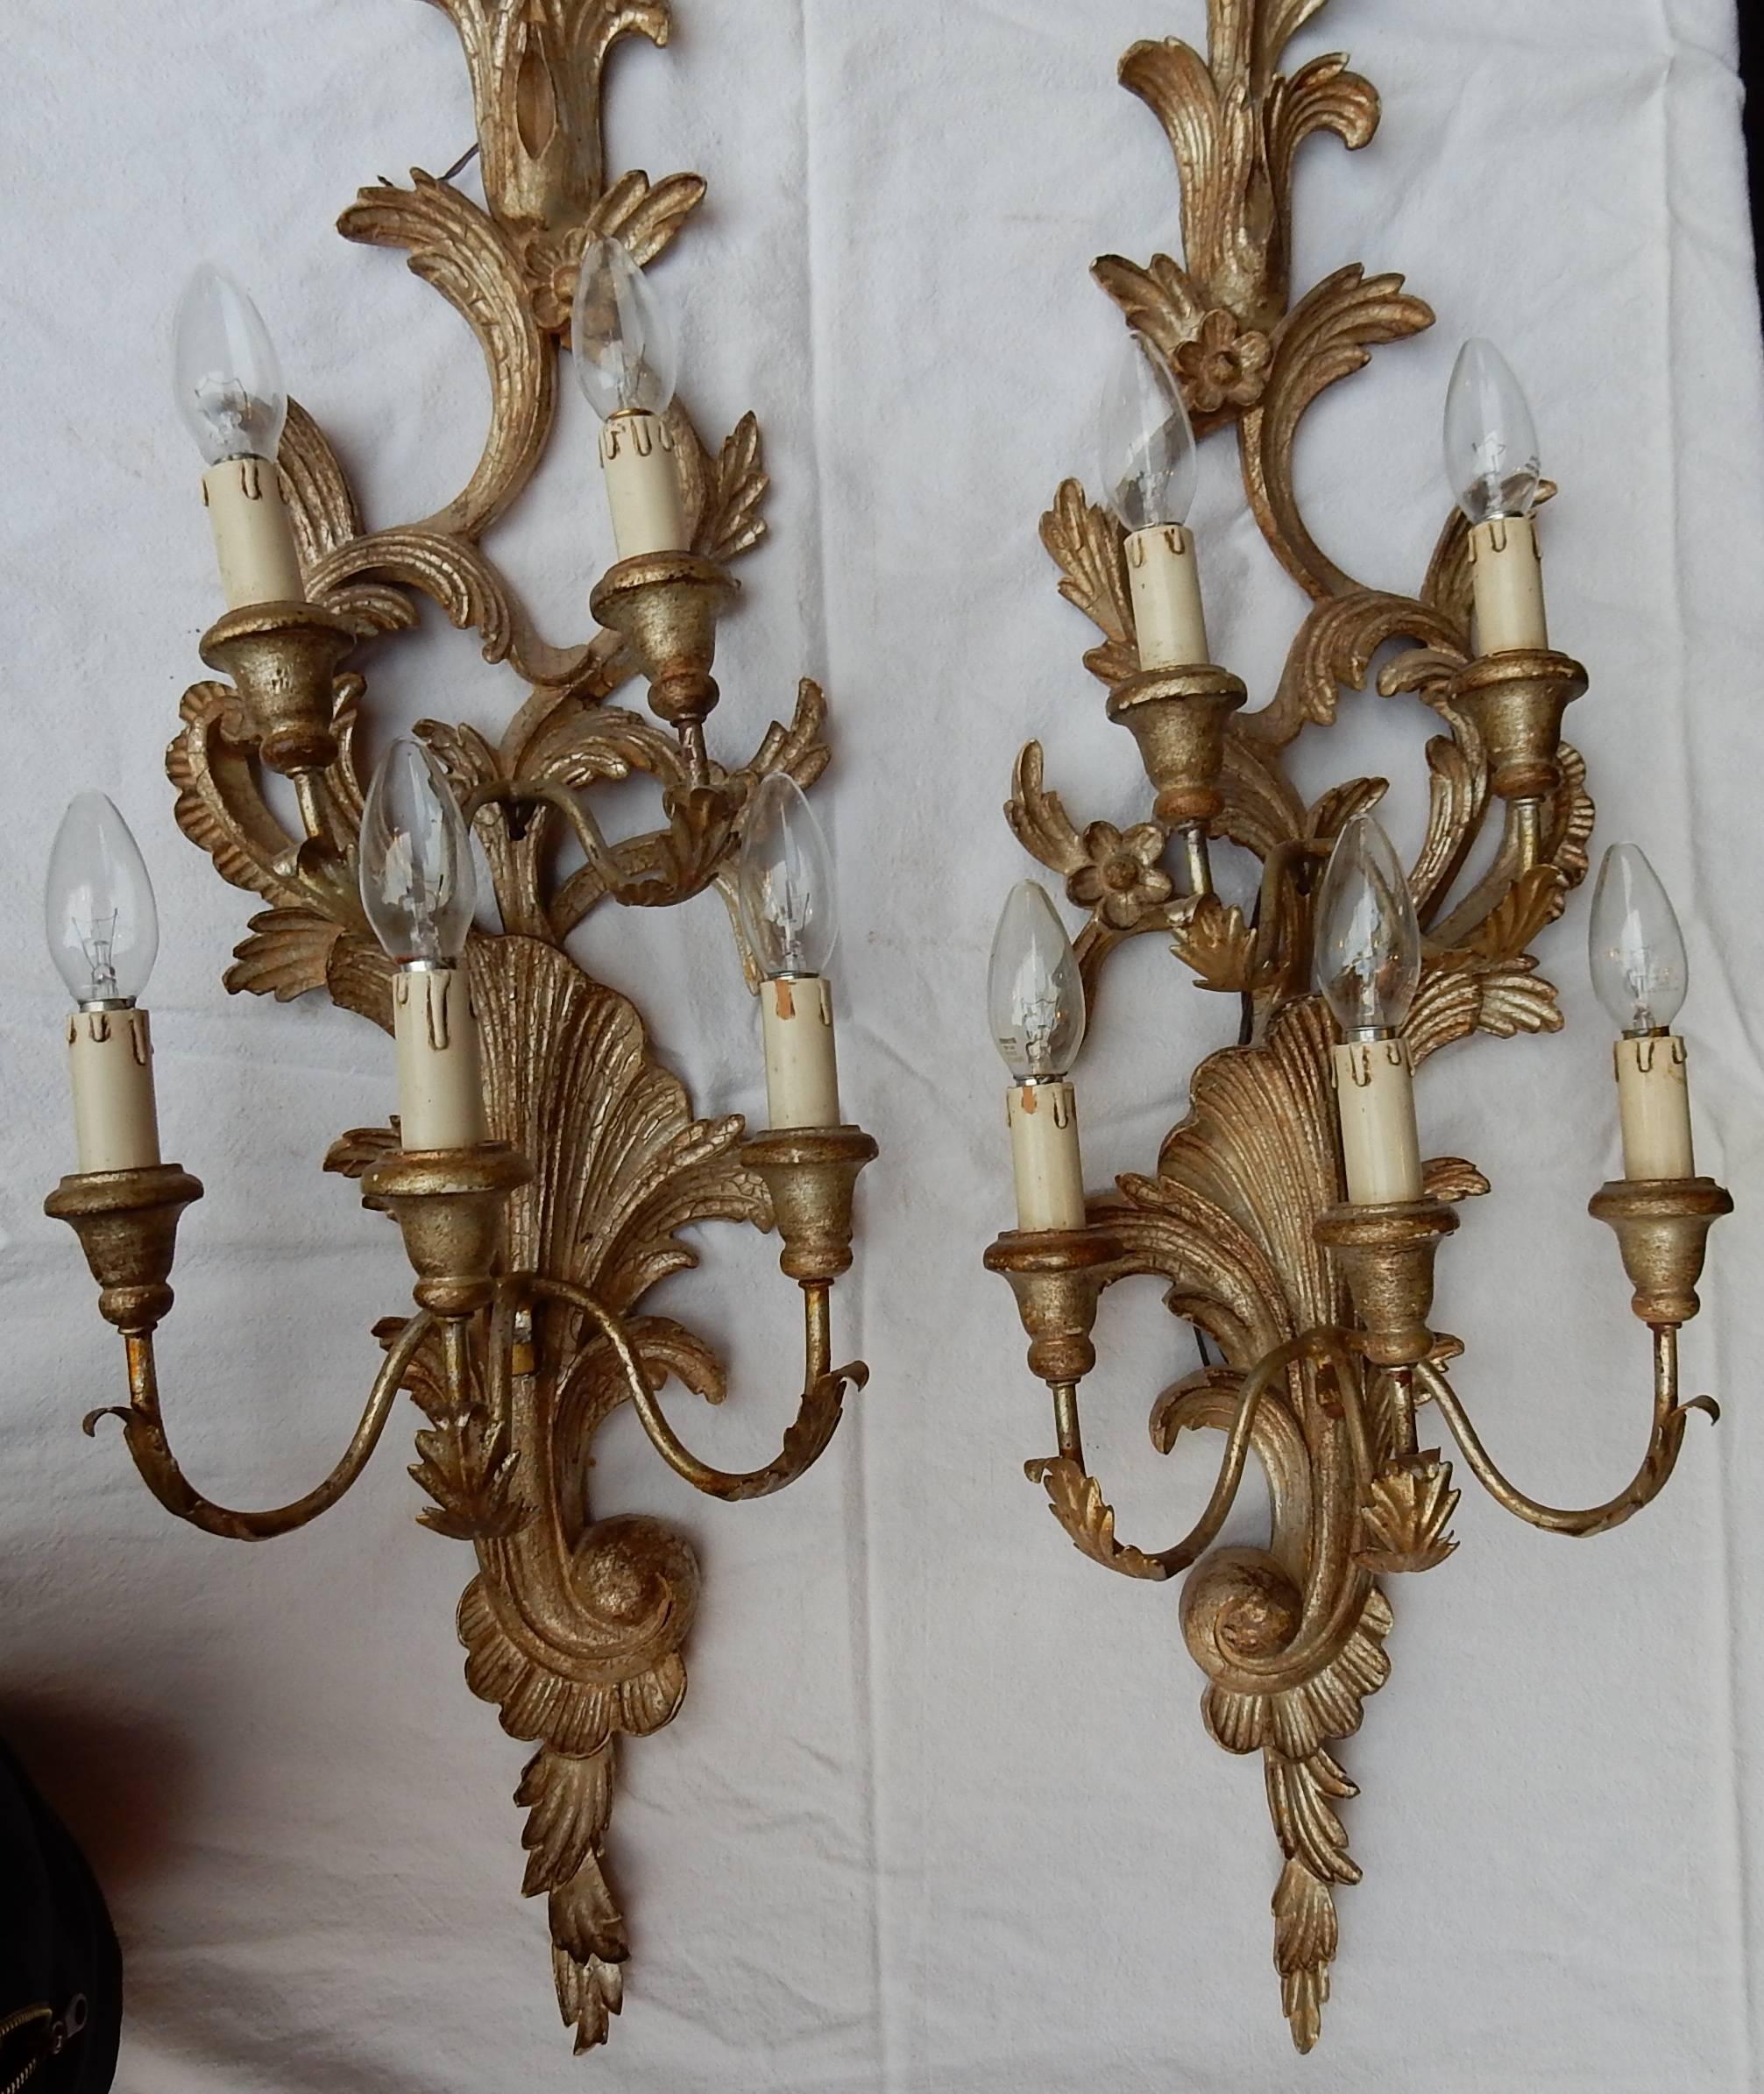 1950s to 1970s Era Pair of Sconces Silvered Wood in the Style of Louis XV  For Sale 2